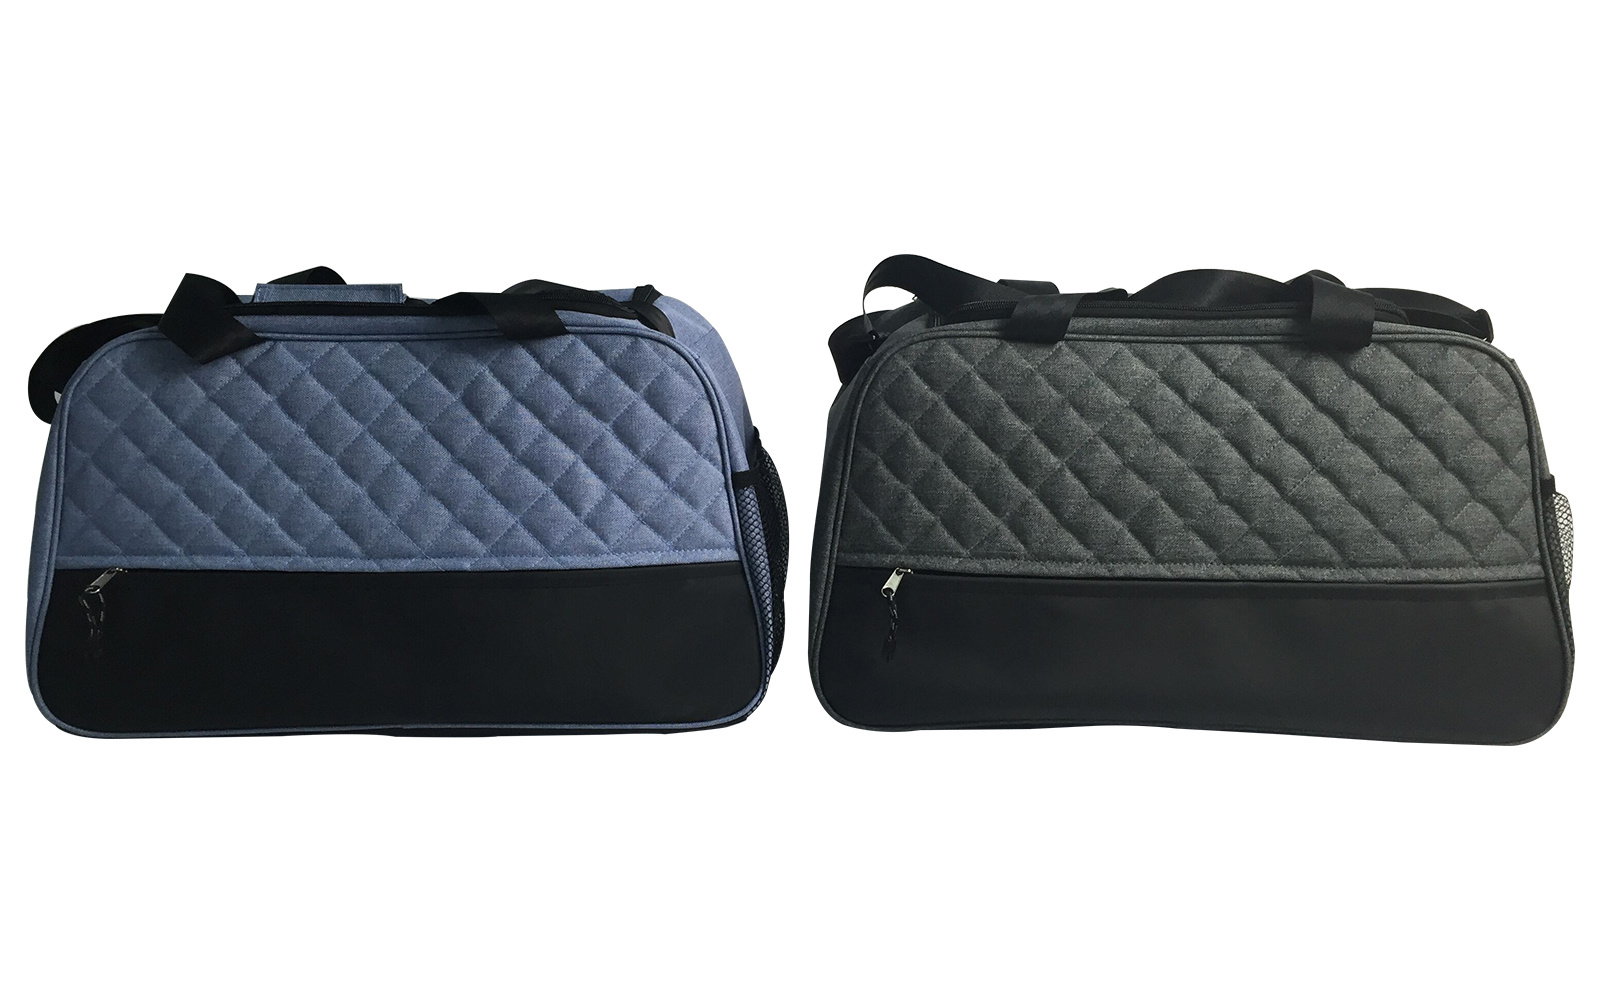 Two Compartment Durable Fashion Travel Luggage Bag Duffle Bag with Quilted